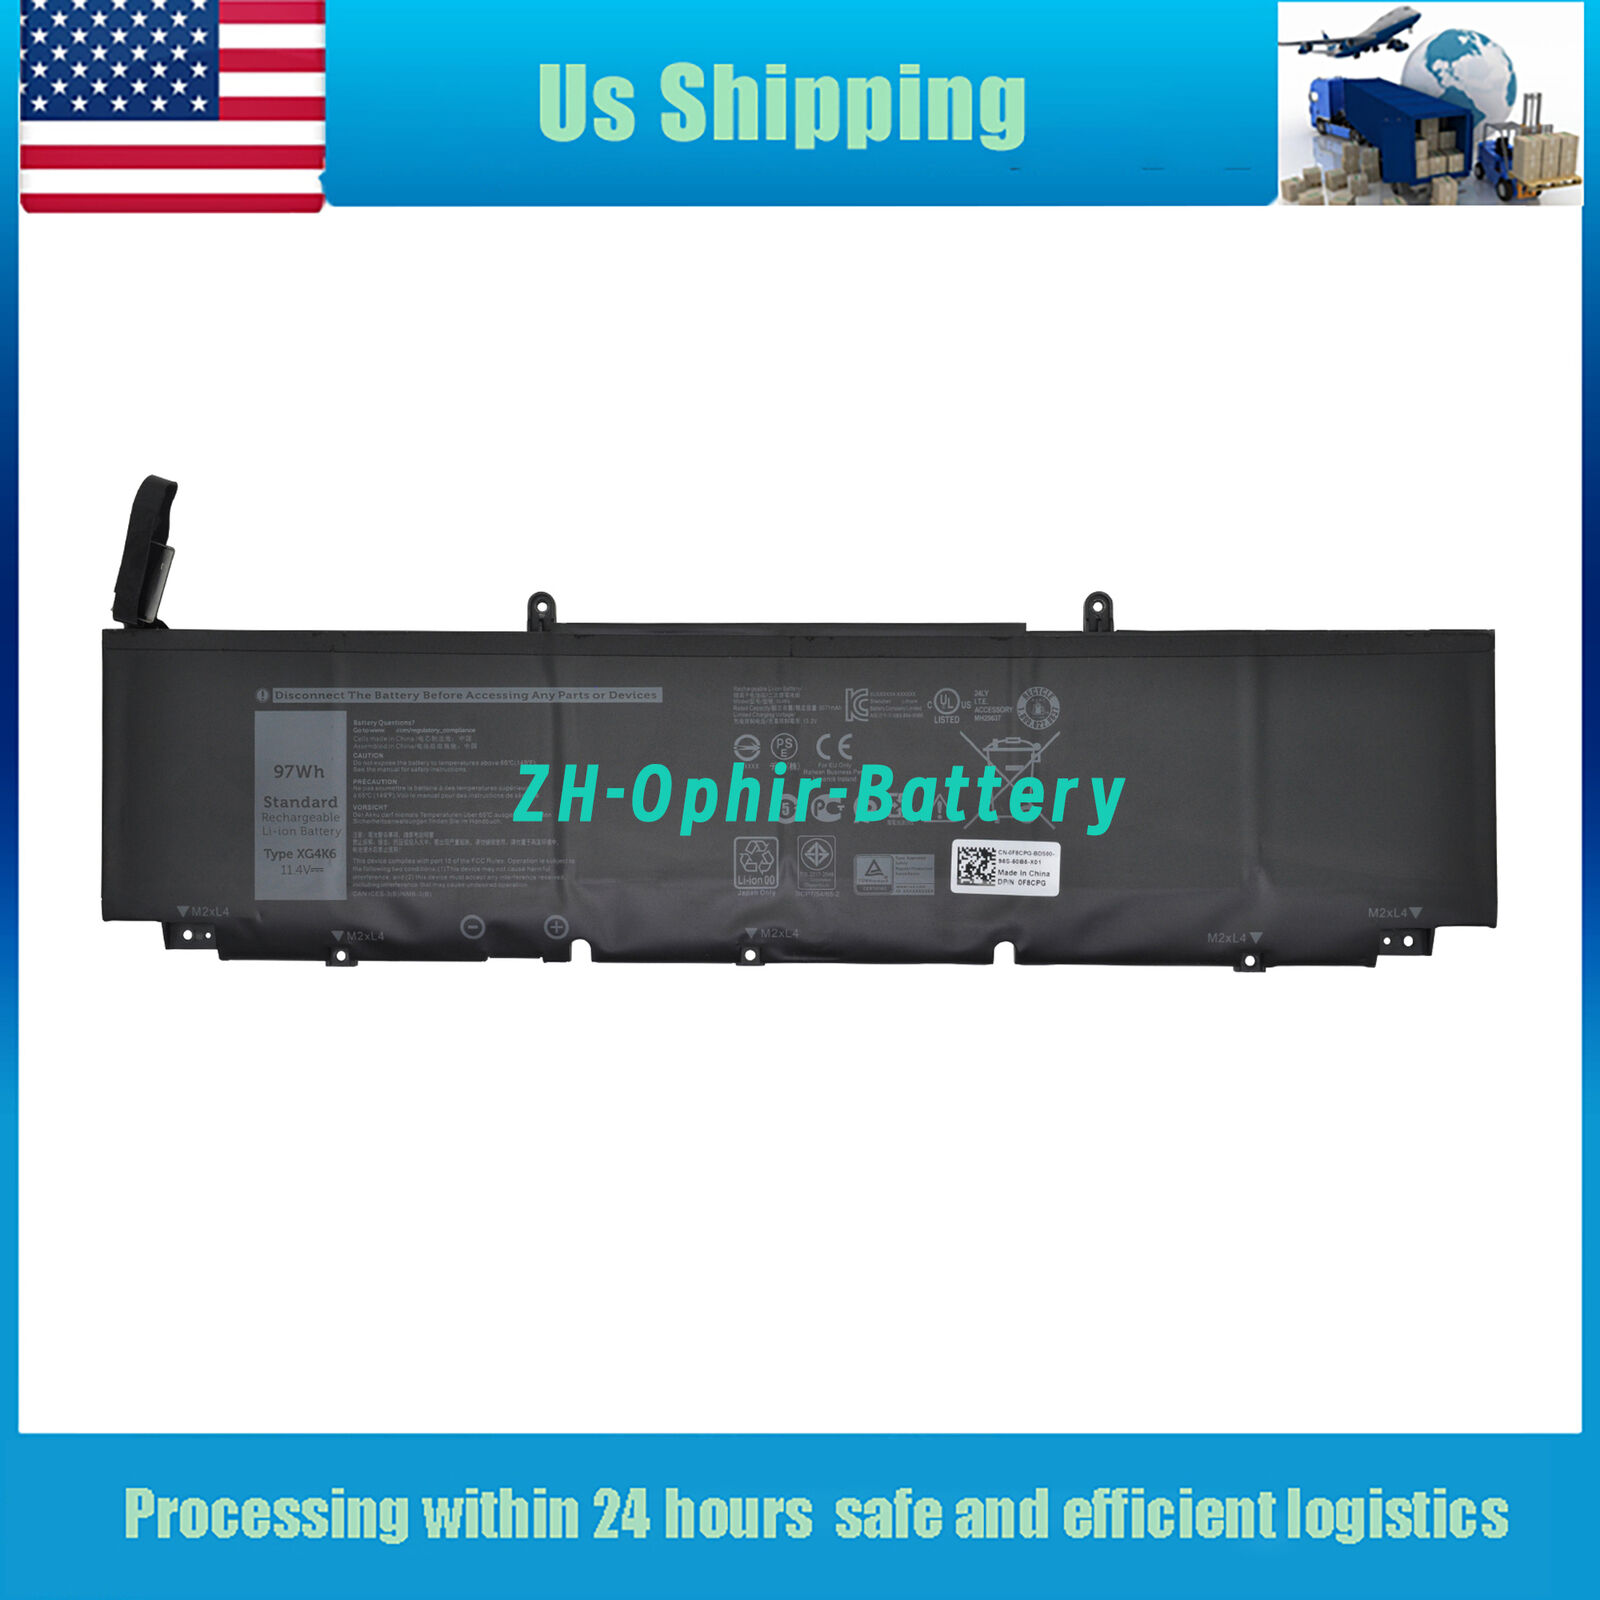 New XG4K6 F8CPG 5XJ6R 01RR3 Battery for Dell XPS 17 9700 Precision 5750 97Wh 